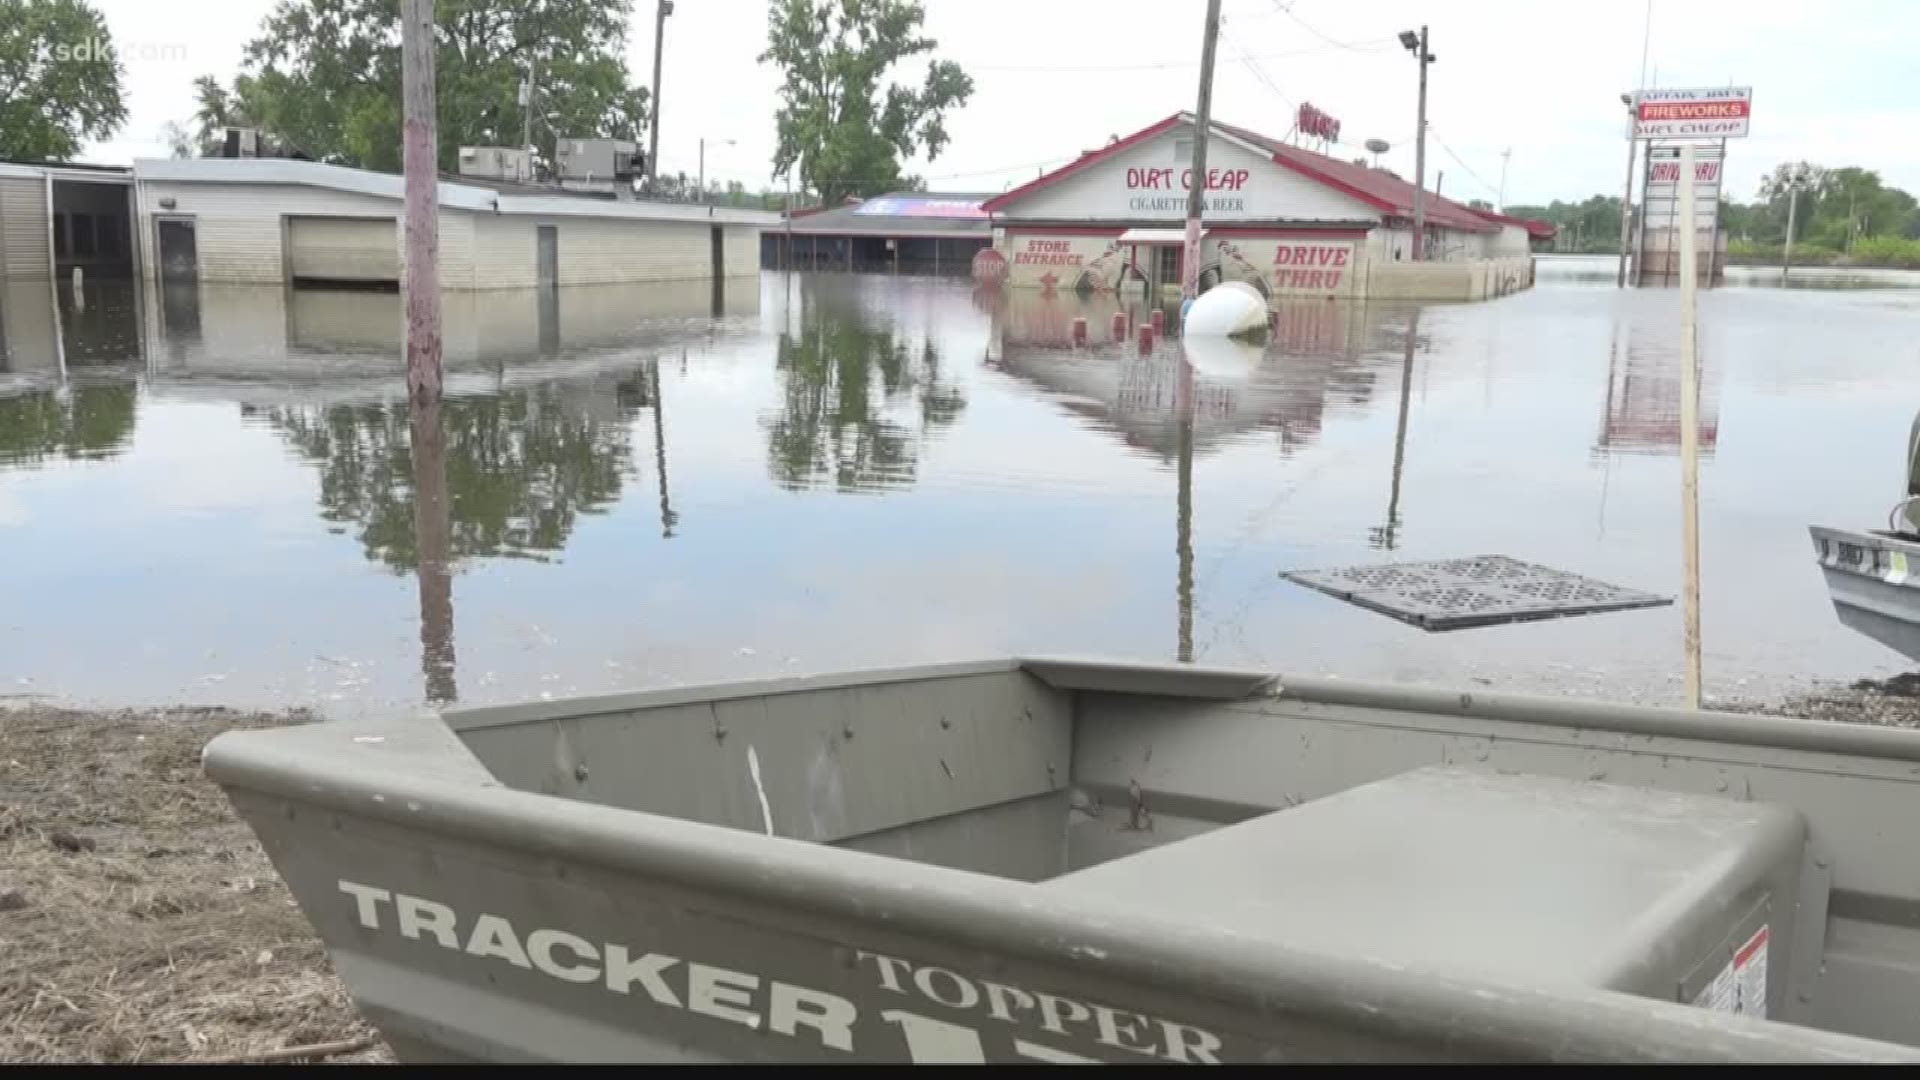 The store is currently underwater as well as many homes and other businesses in West Alton.